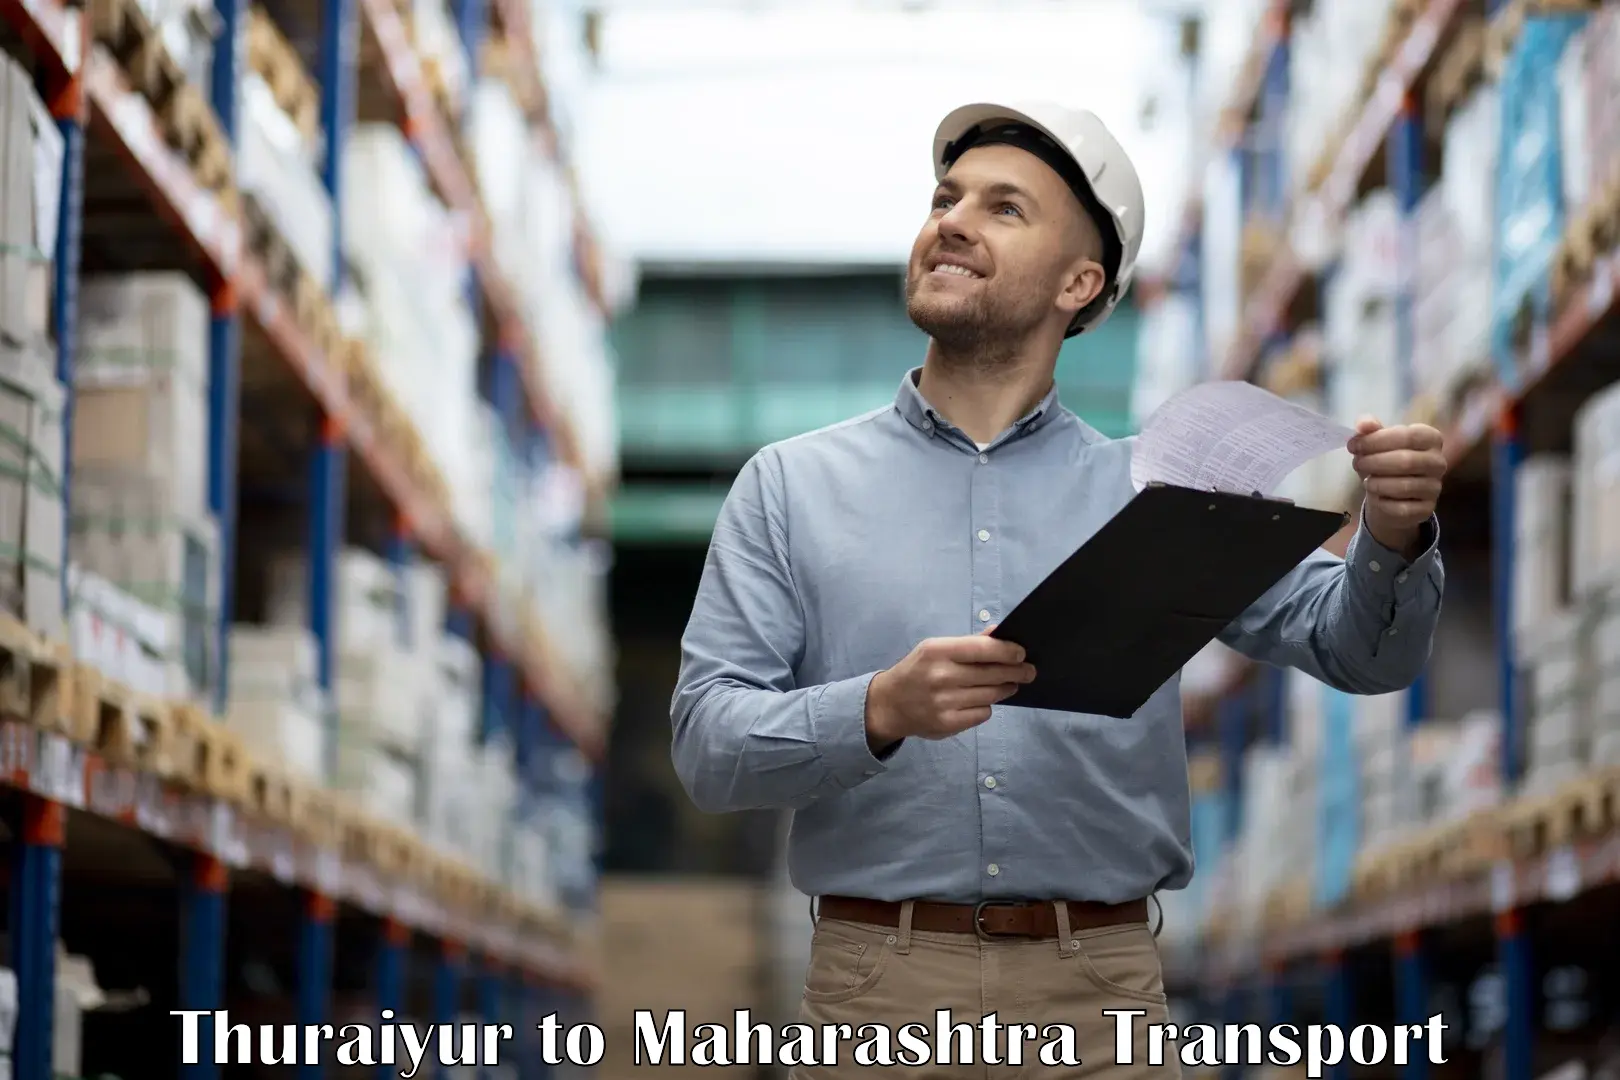 Transportation services in Thuraiyur to Chandrapur